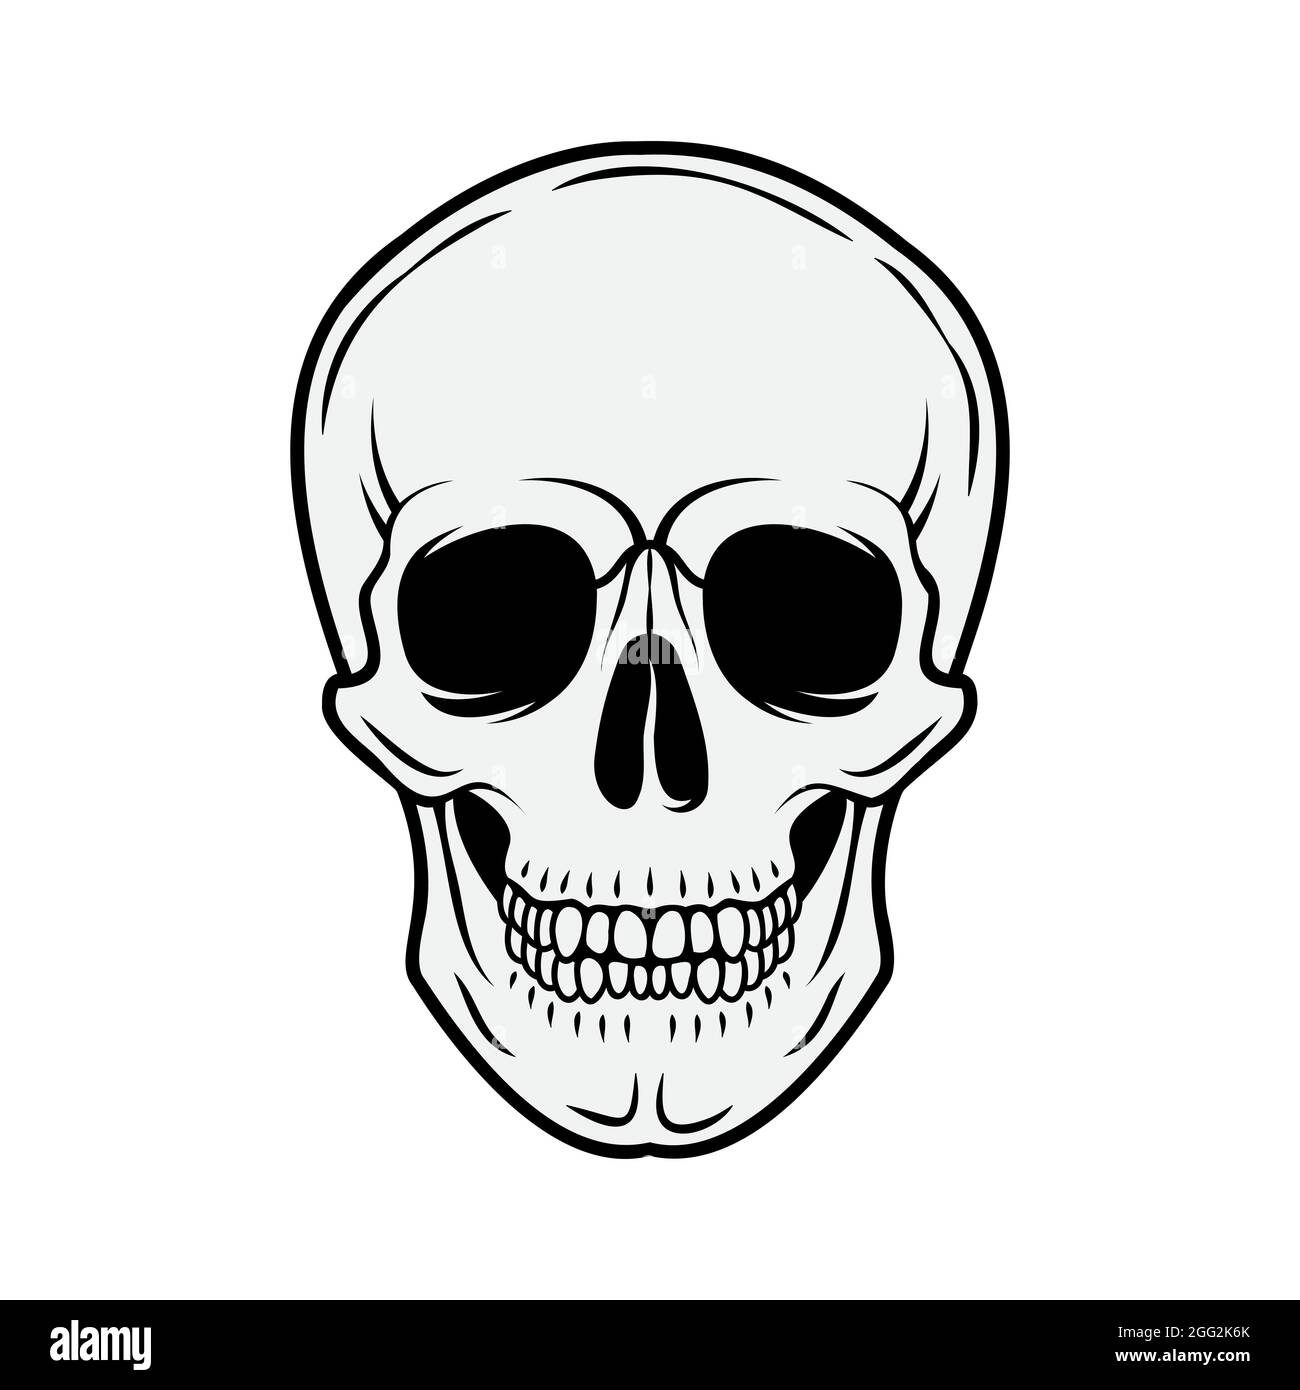 Human skull. Front view. Vector black and white hand drawn illustration isolated on white background. Stock Vector